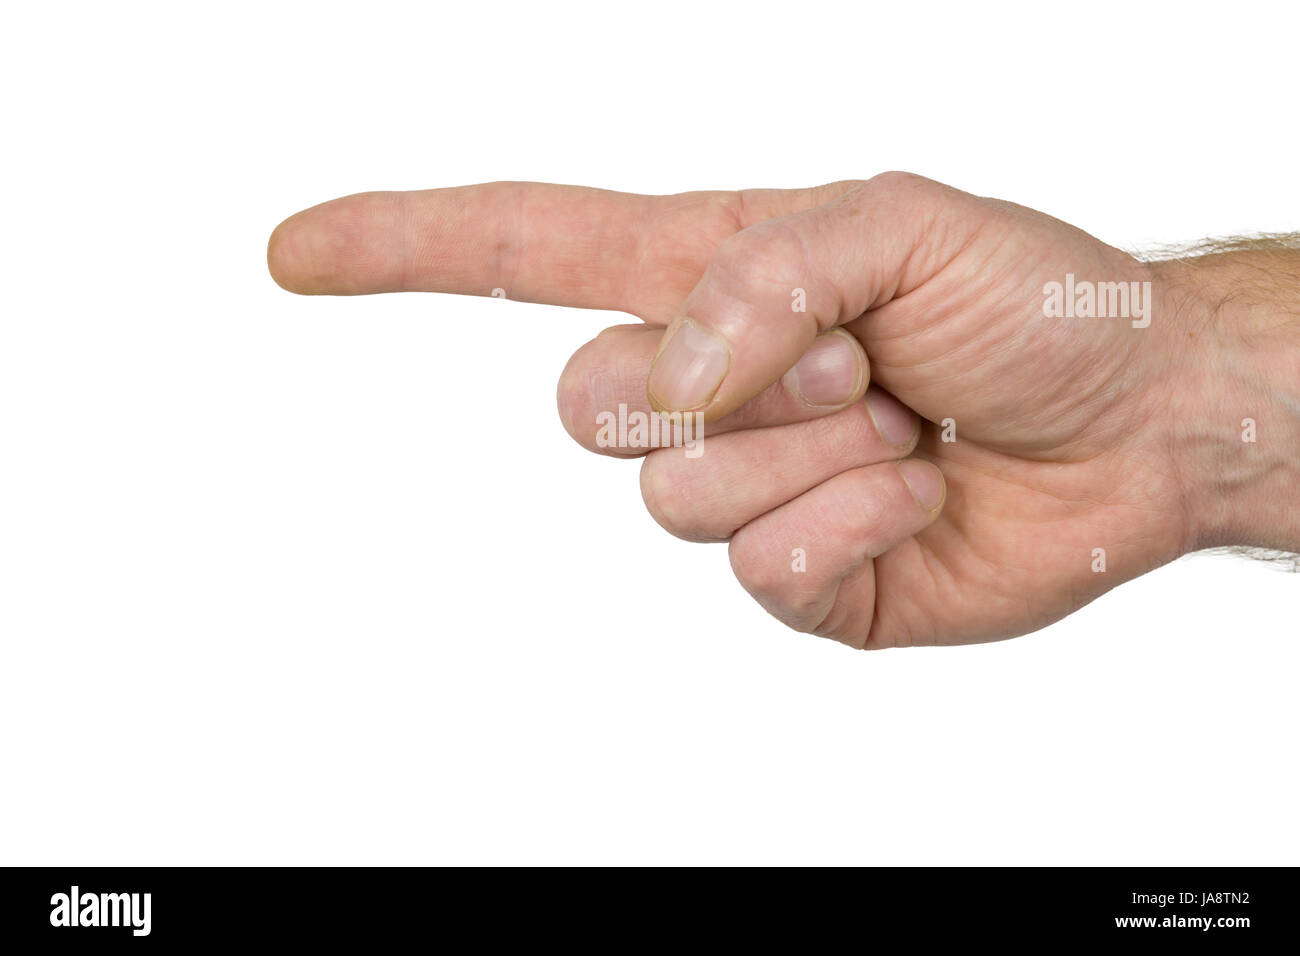 sign, signal, indicate, show, hand, hands, finger, communication, gesturing, Stock Photo